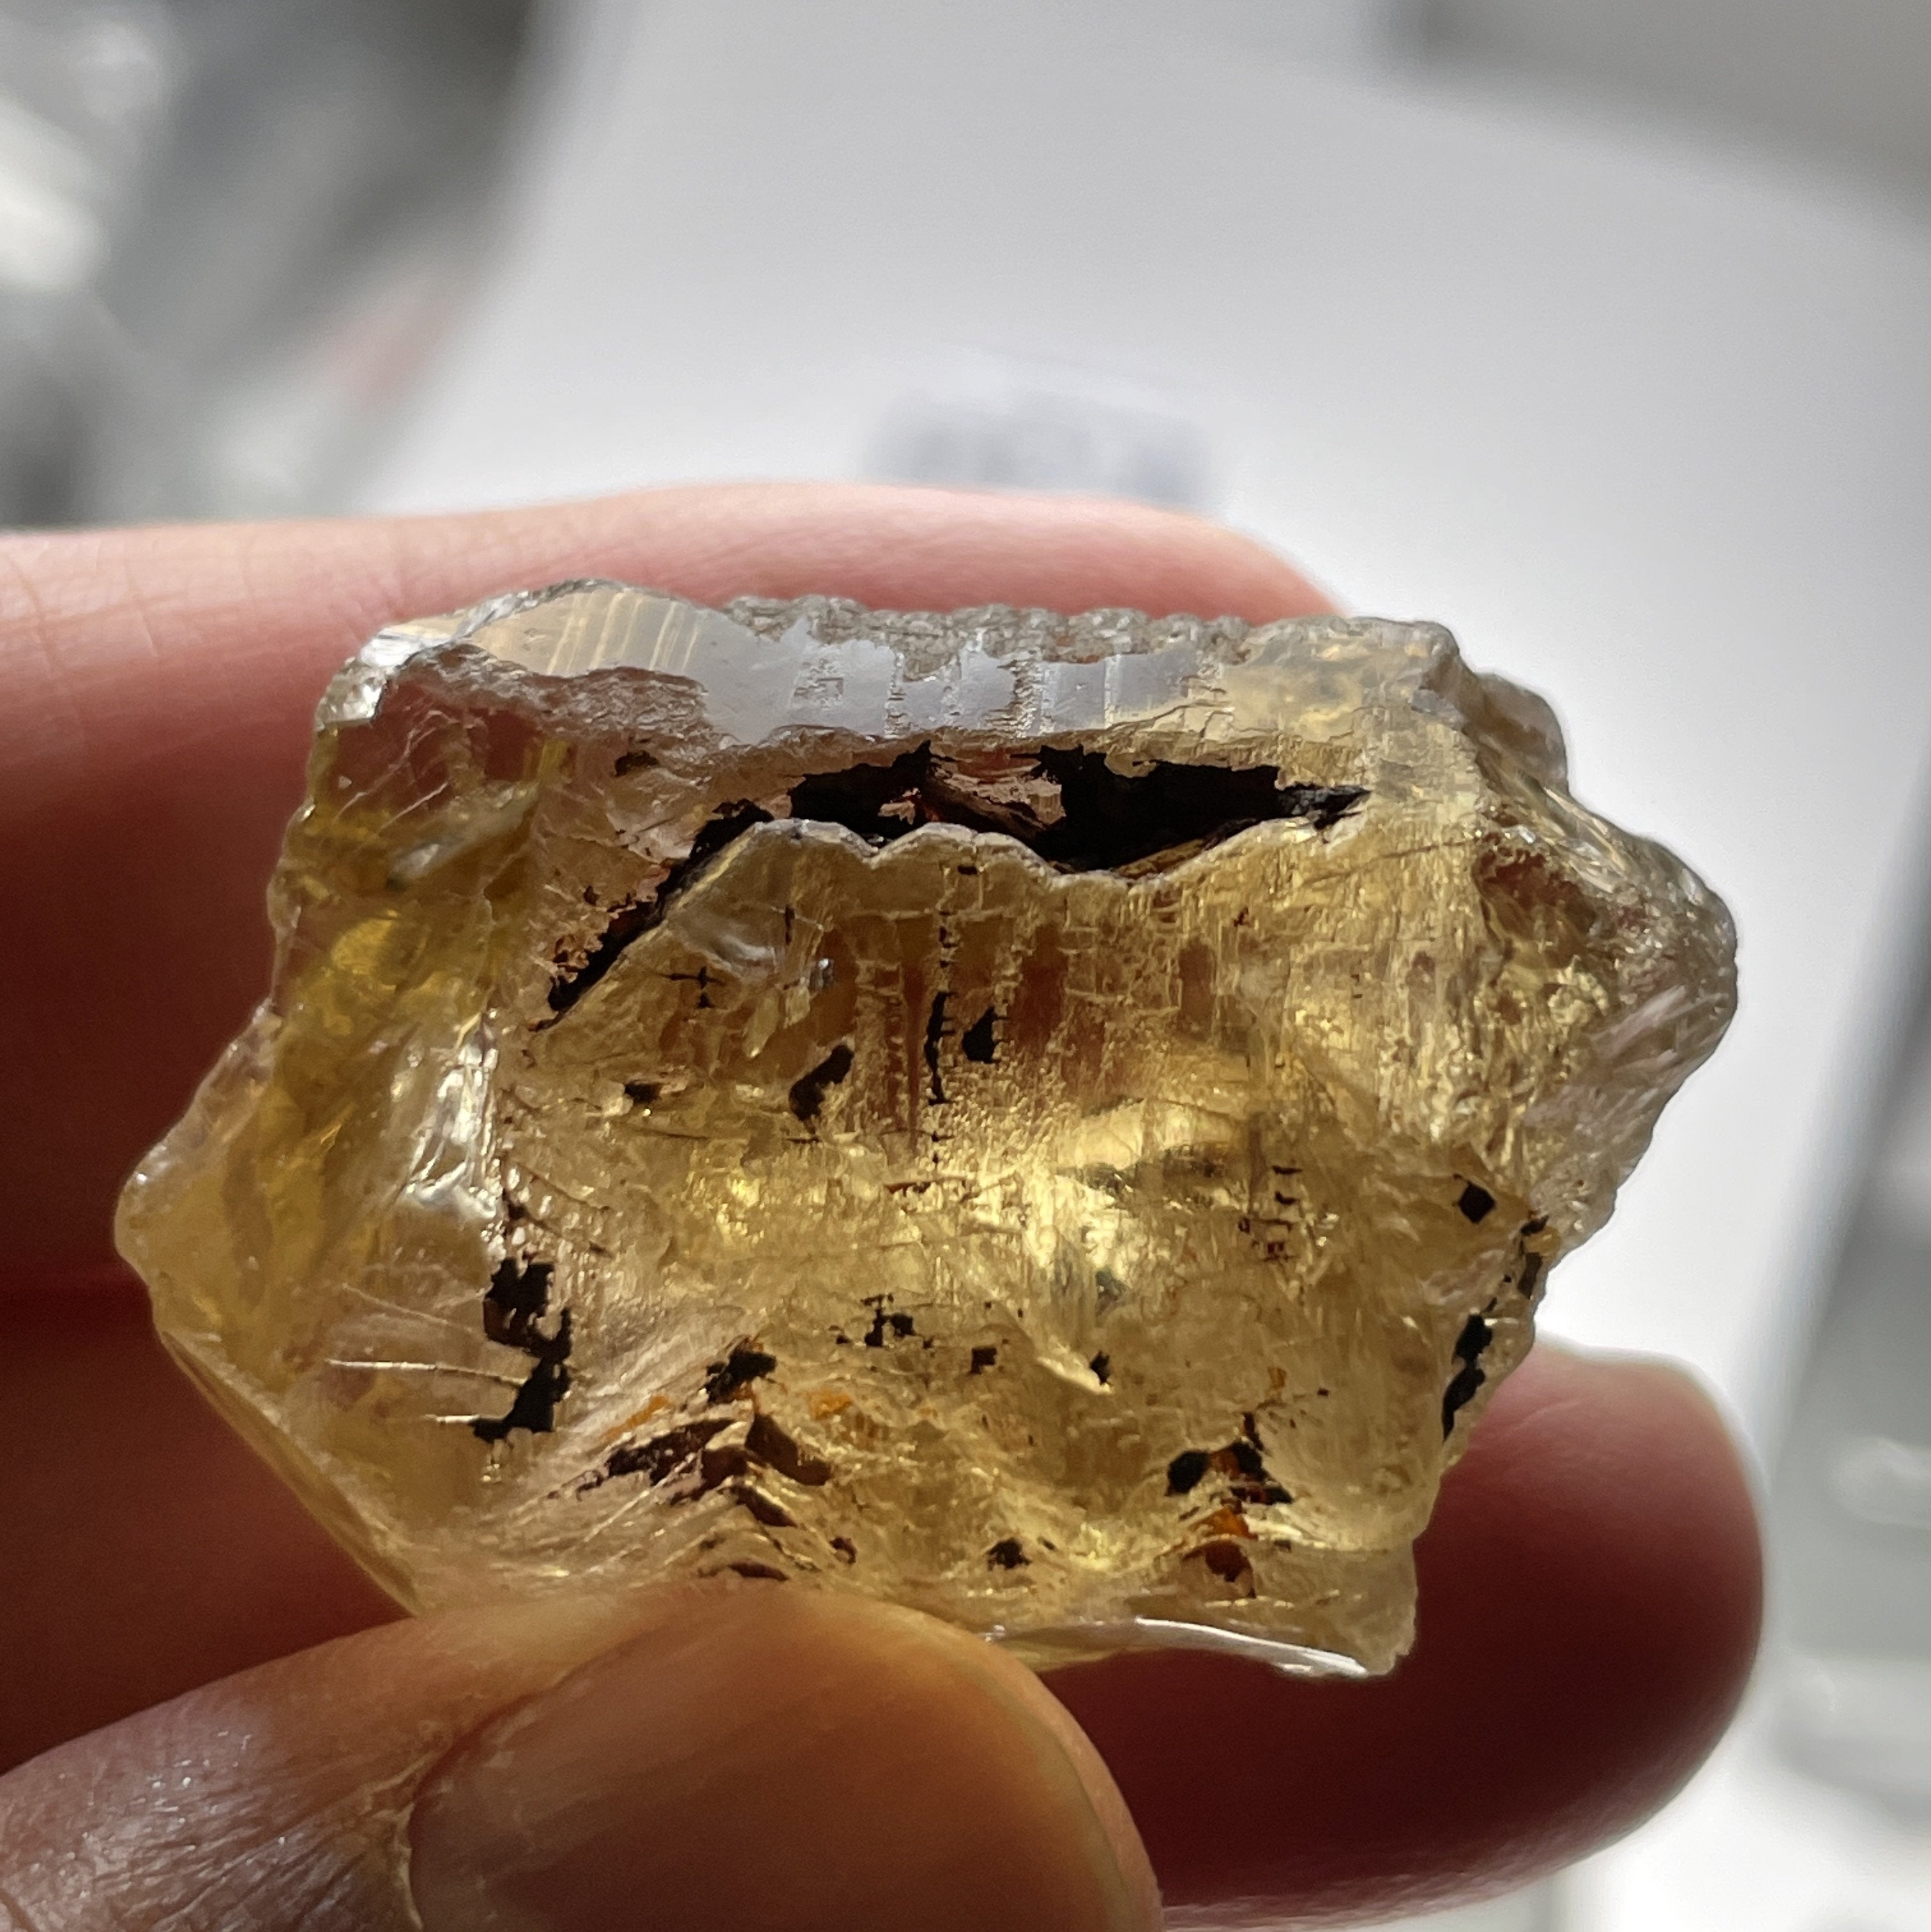 23Gm Citrine Zambia. Untreated Unheated. Rare As Not Heated From Amethyst Natural Colour.